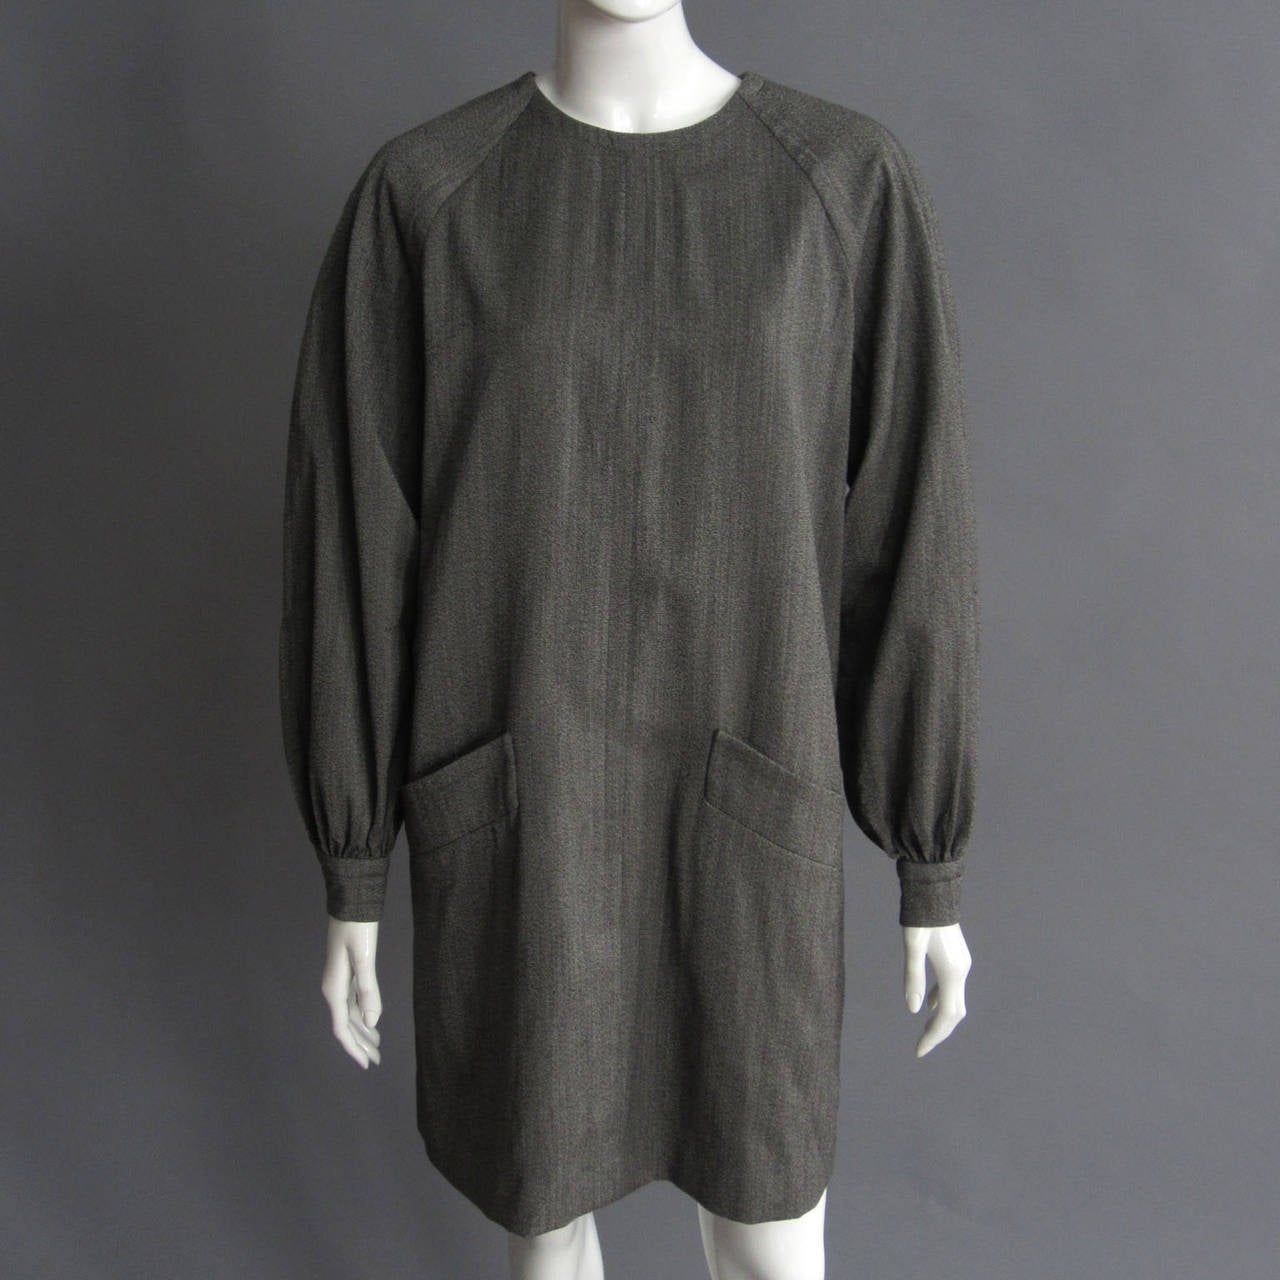 Grey wool smock dress that is the epitome of Parisian chic. The raglan sleeves are voluminous, cinching at the wrist with a seamed cuff and single button closure. Front, hip pockets are trimmed in matching grew wool with seam detailing. Fully lined.